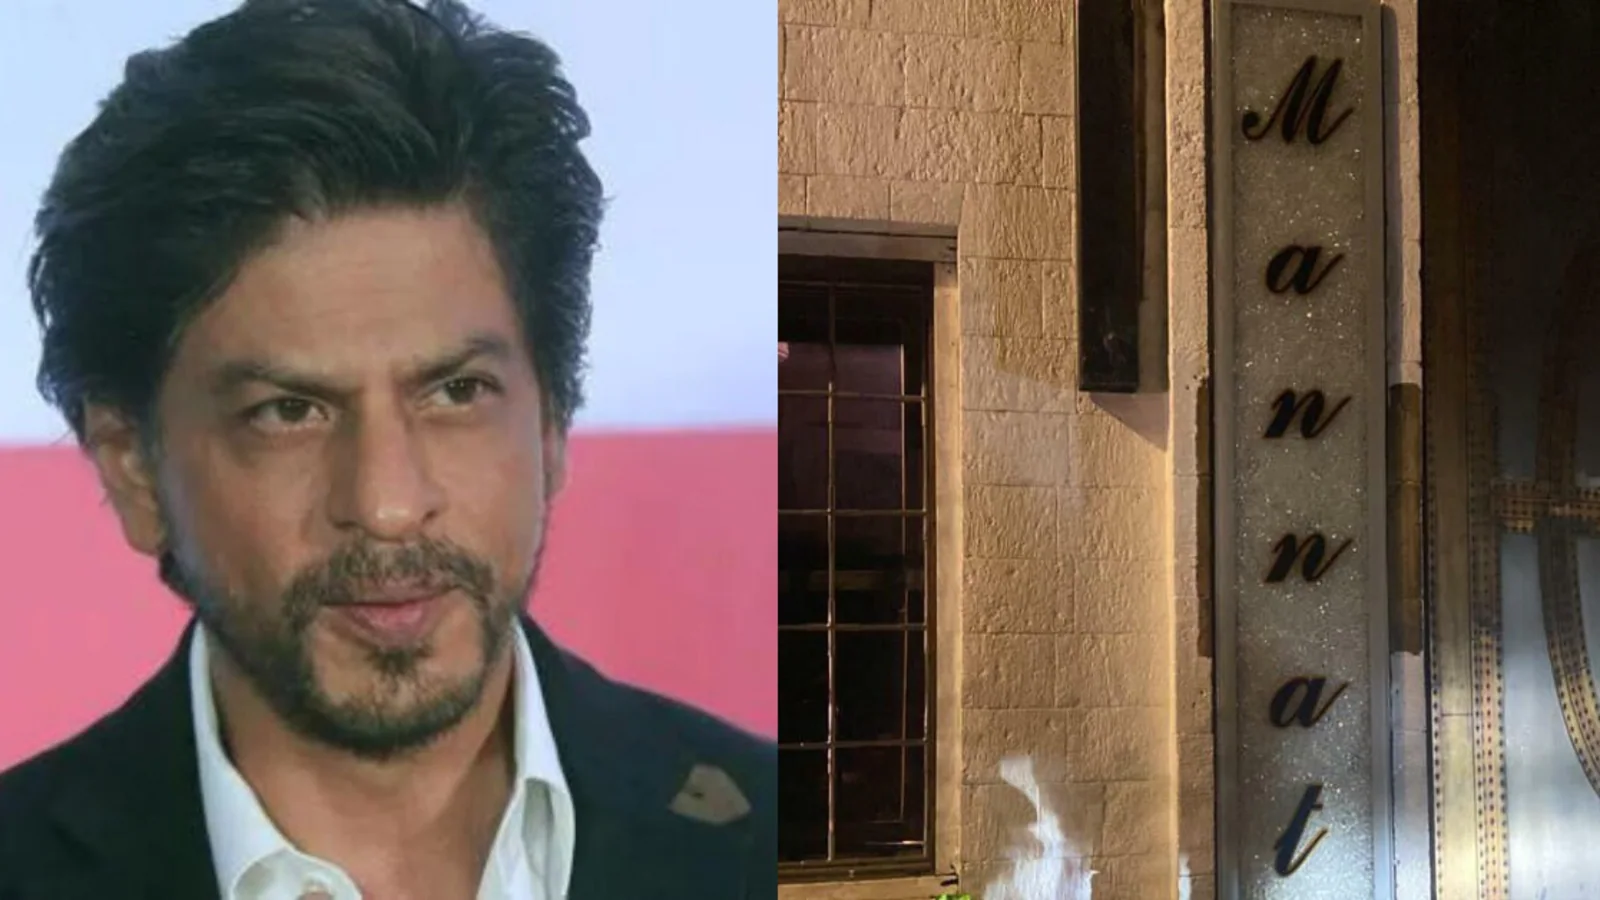 Shah Rukh Khan’s home Mannat trends on Twitter after fans notice new name plate: ‘It’s an evolution’